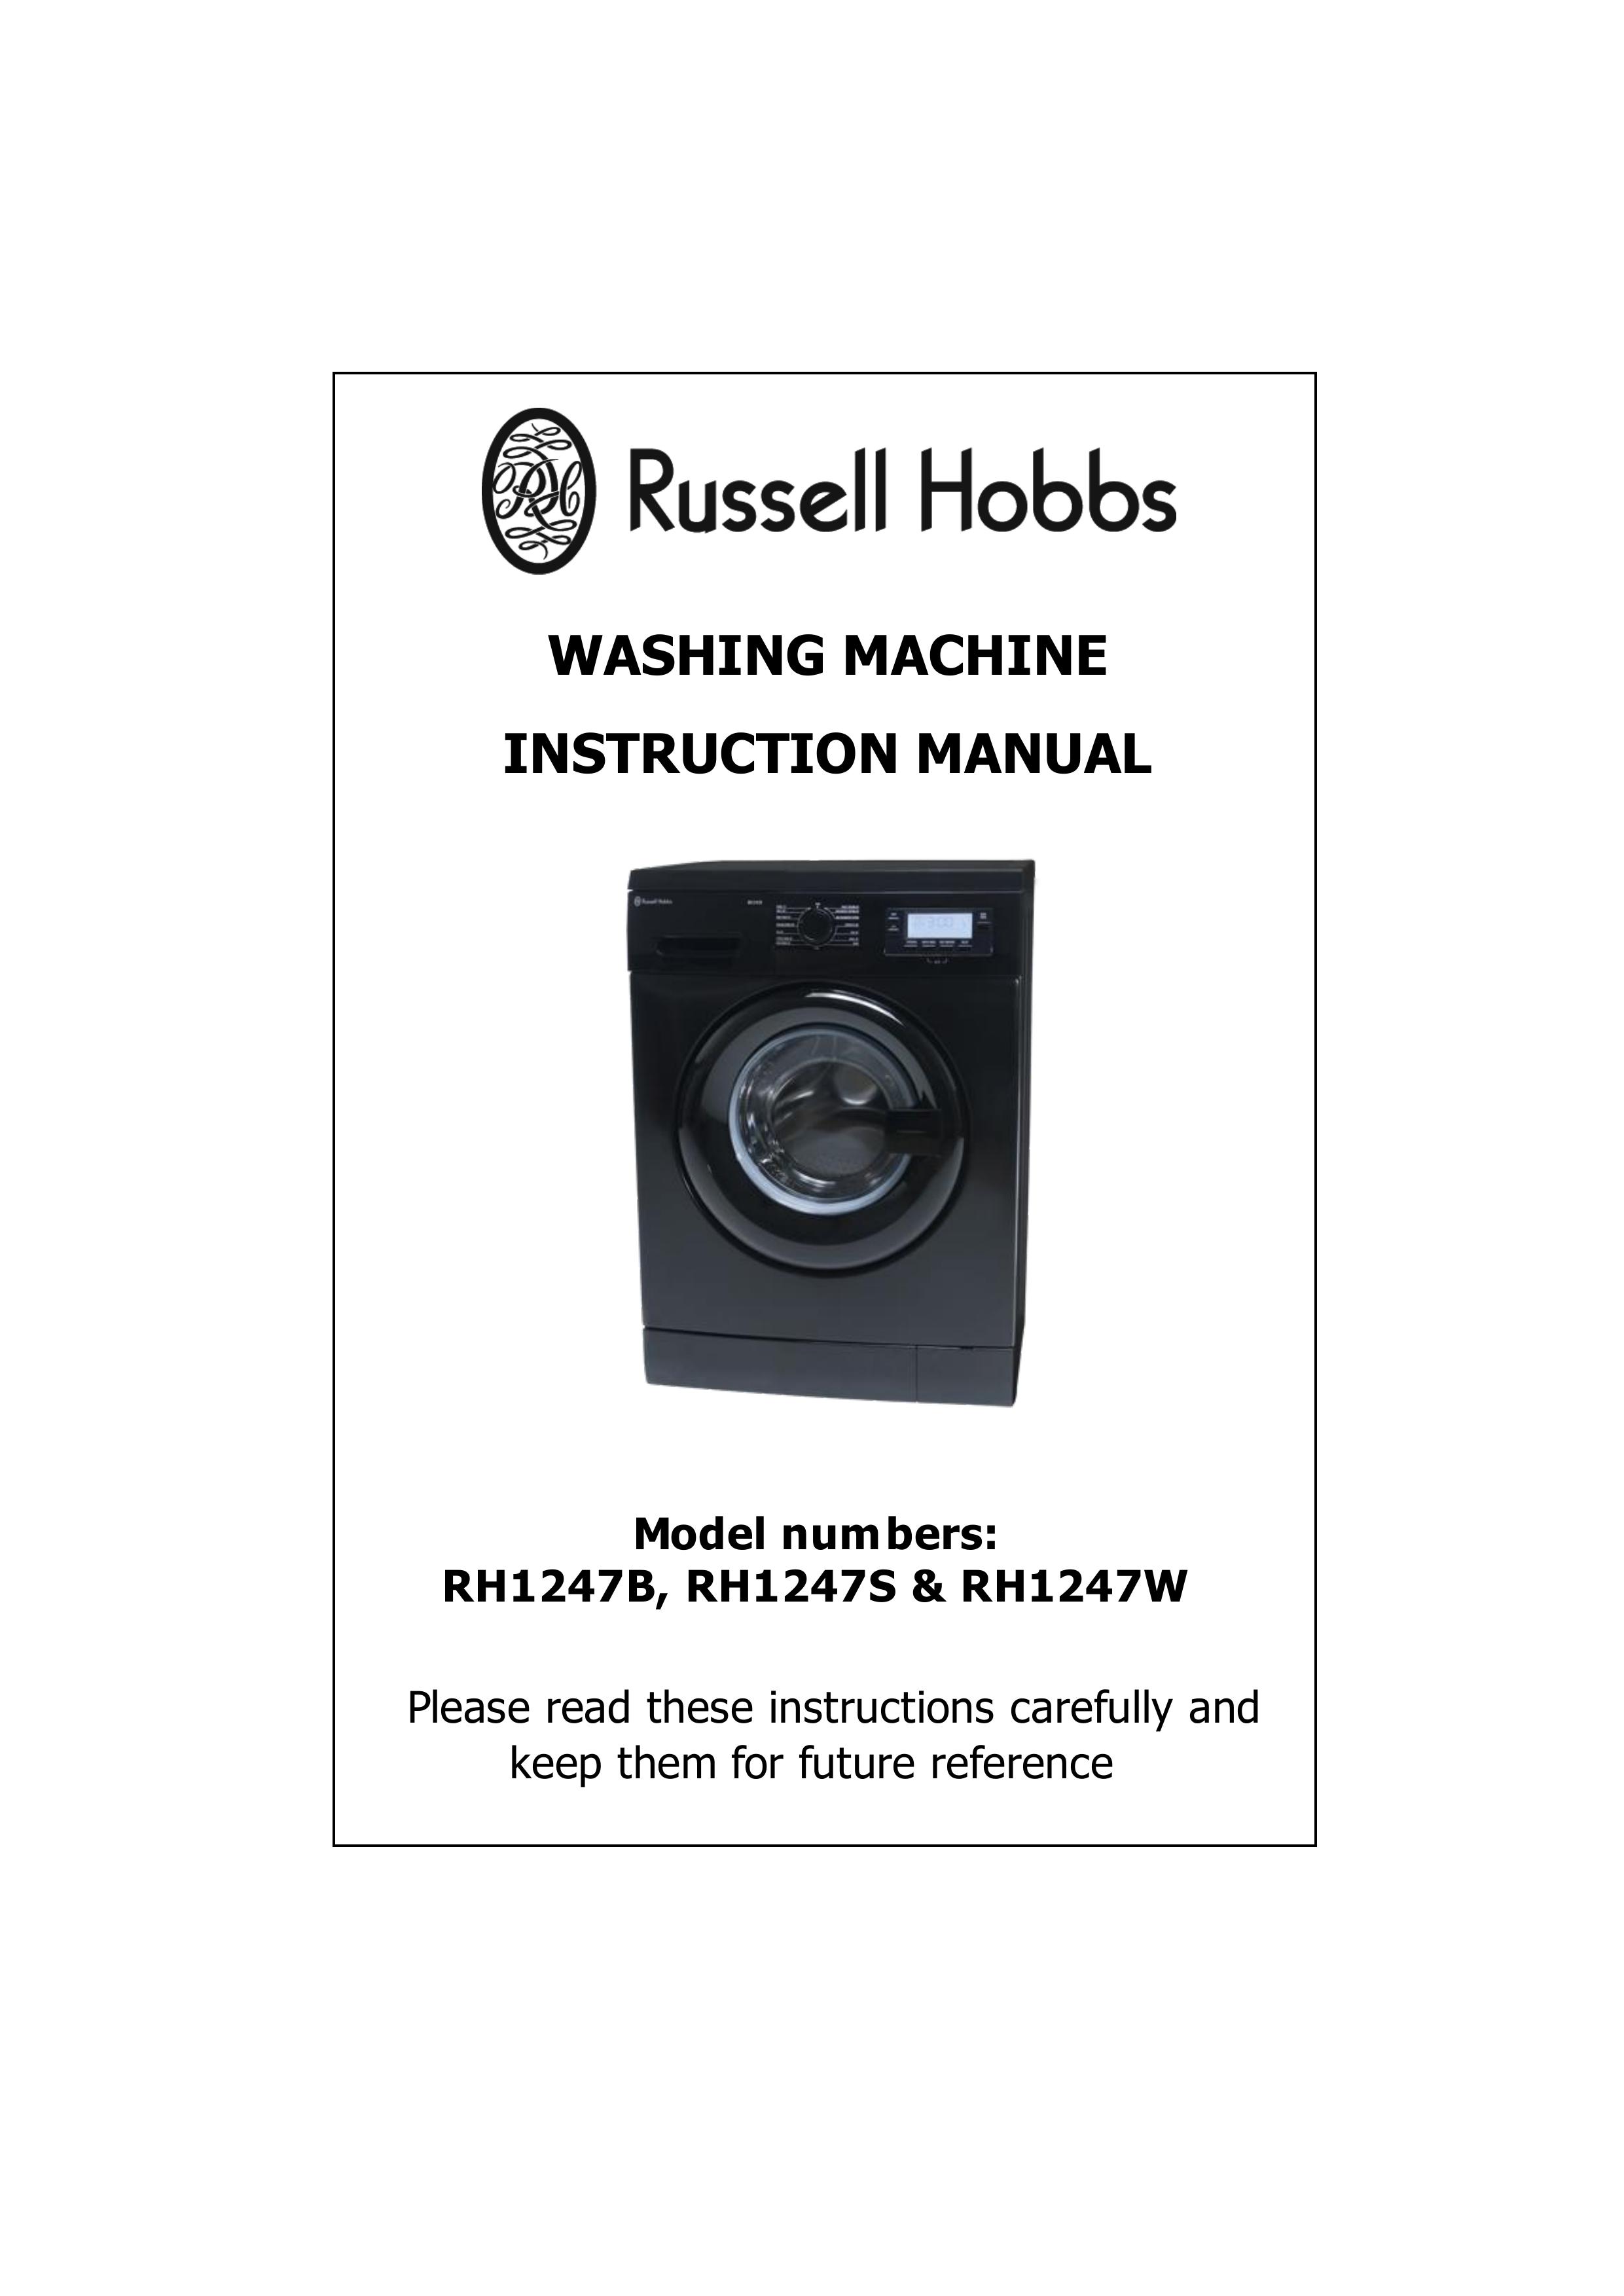 Russell Hobbs RH1247W Washer User Manual